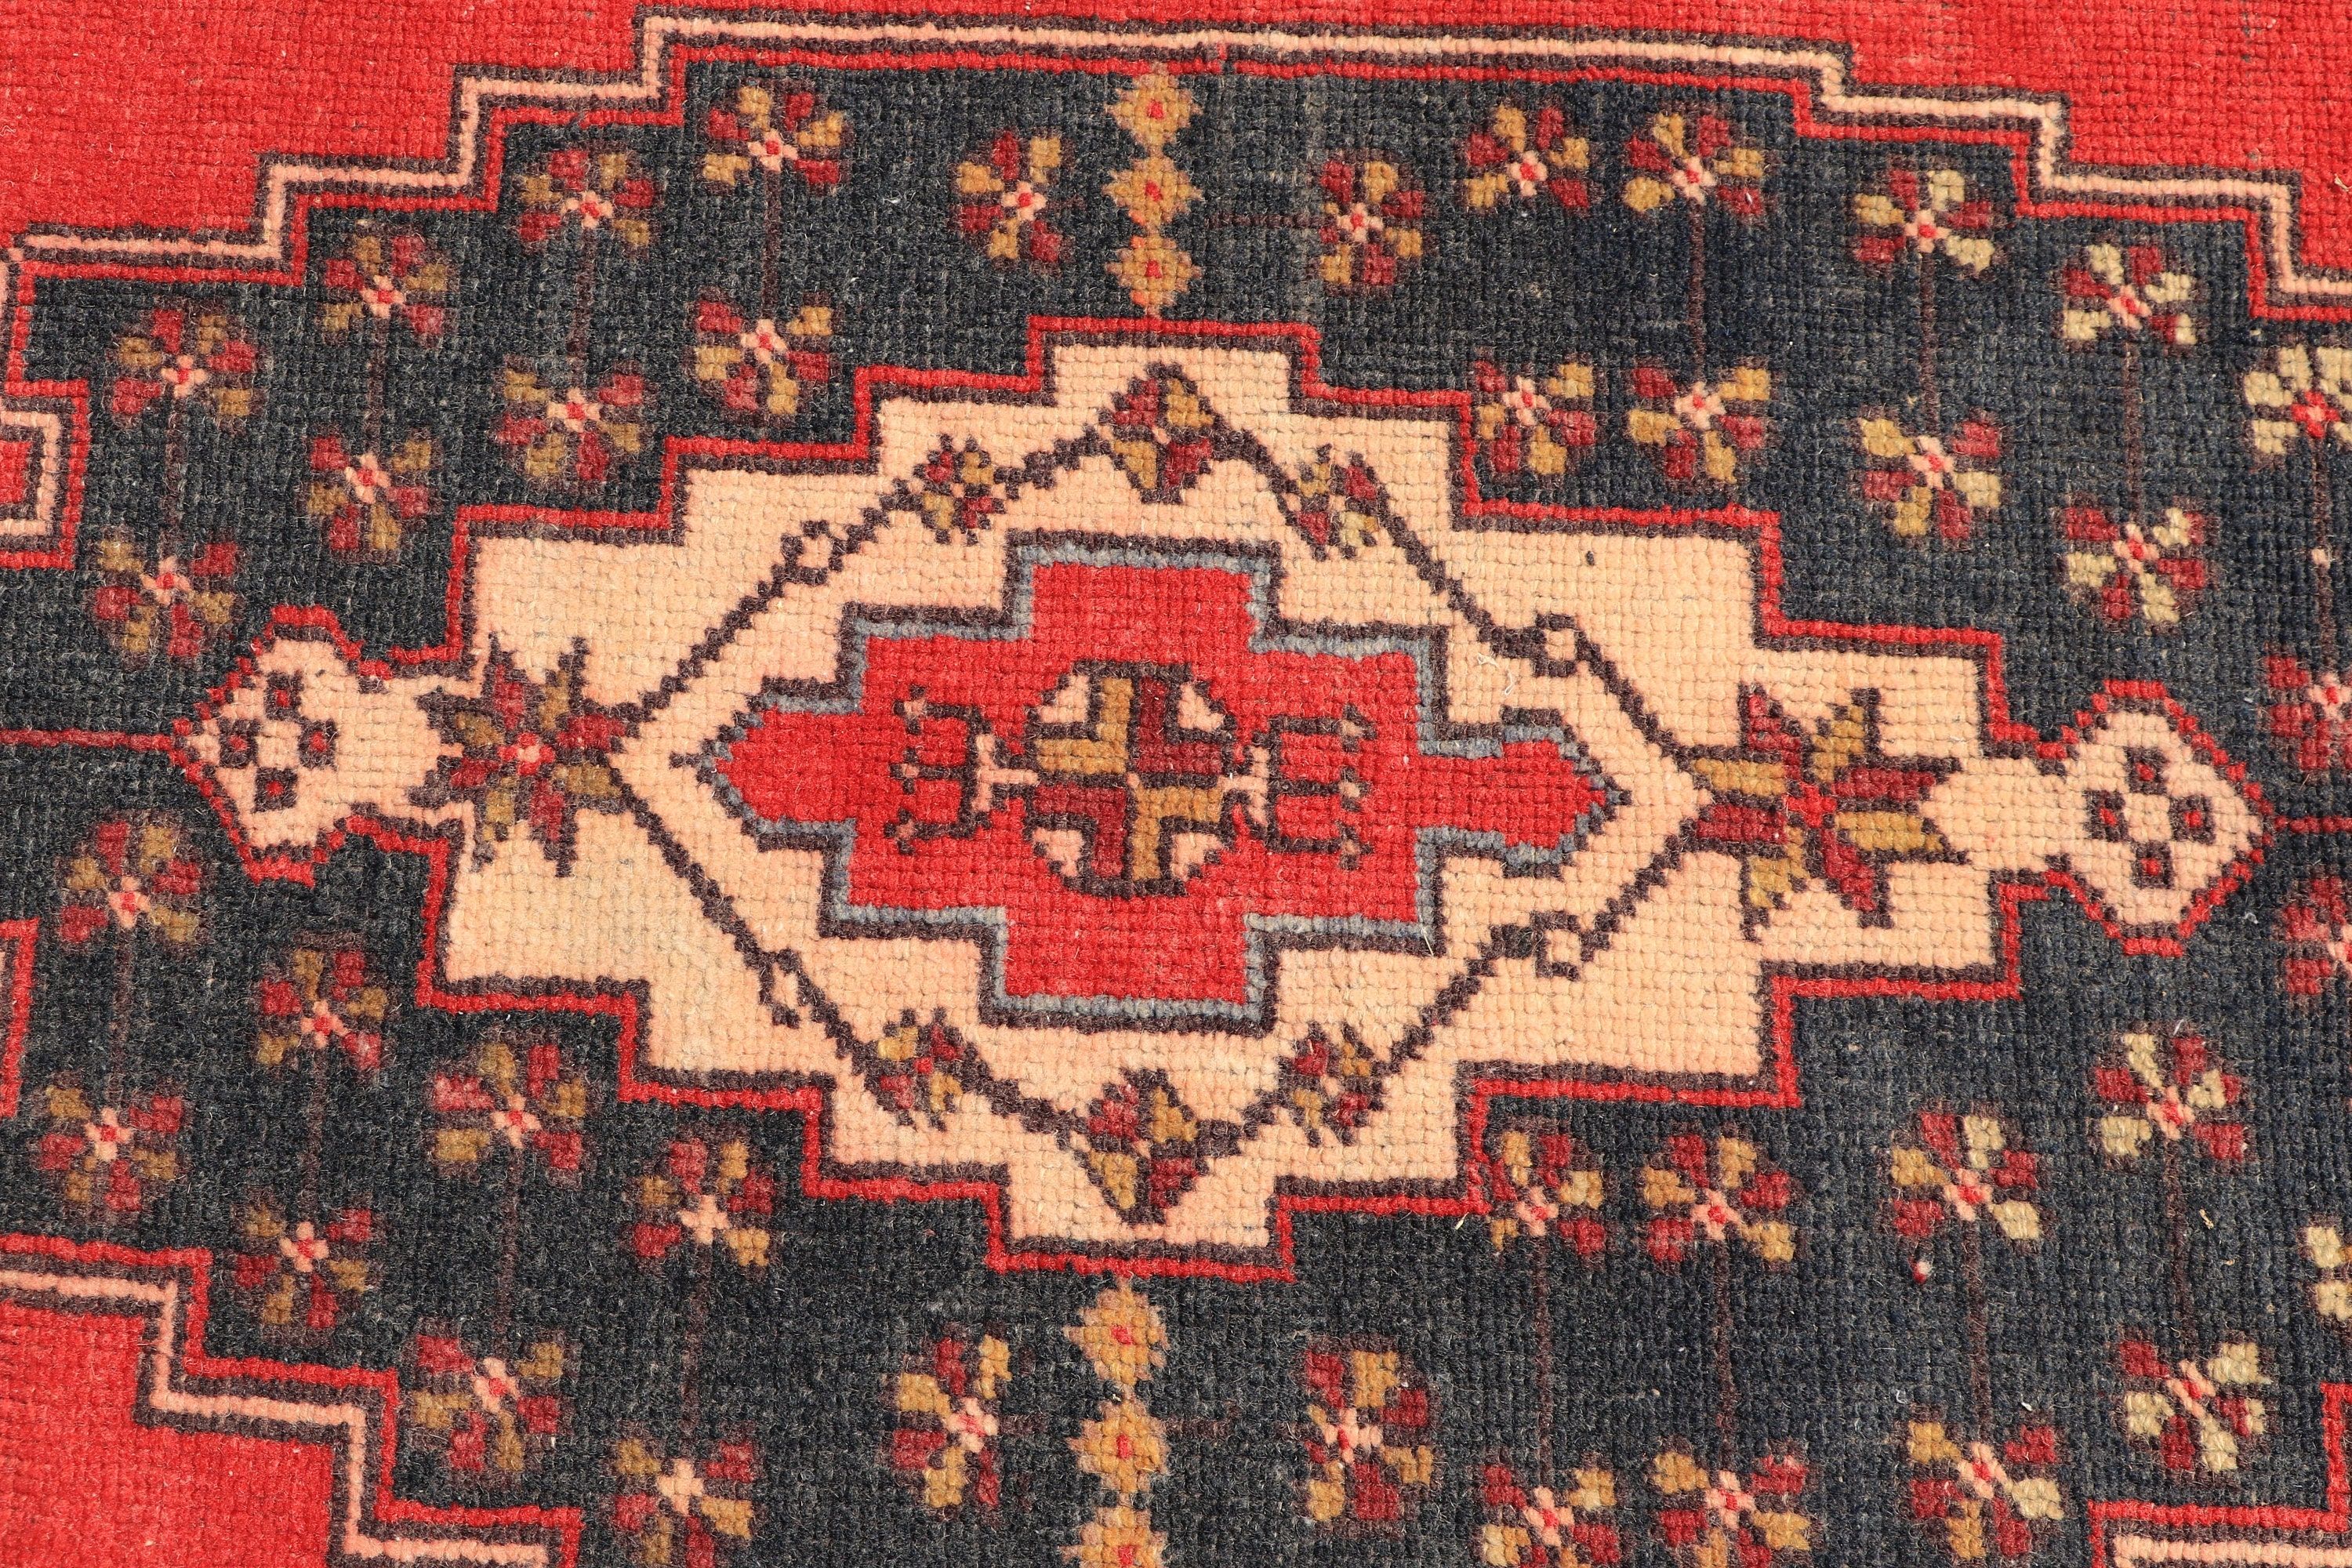 Home Decor Rug, Indoor Rugs, 4.1x8 ft Area Rugs, Turkish Rug, Red Anatolian Rugs, Pale Rug, Rugs for Dining Room, Vintage Rug, Moroccan Rug